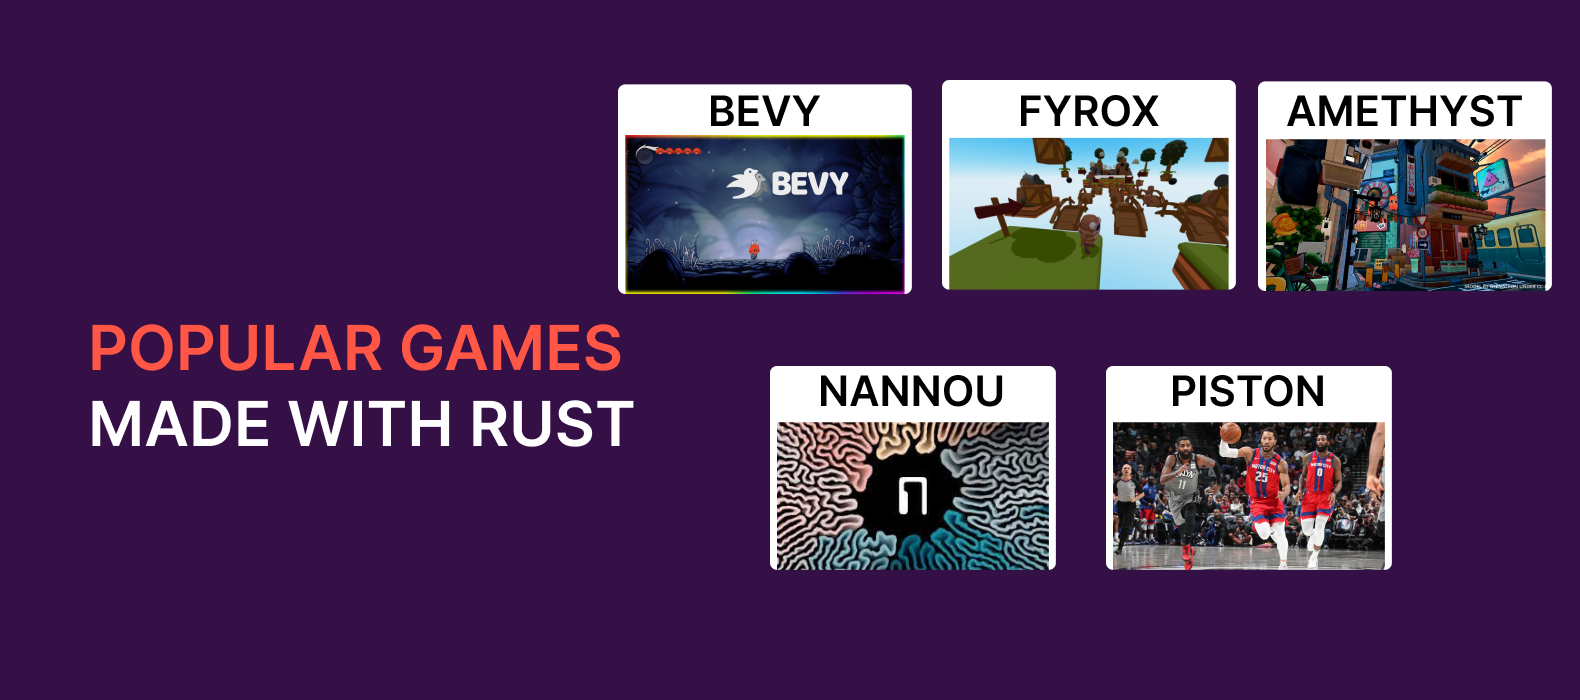 Popular Games made with Rust 